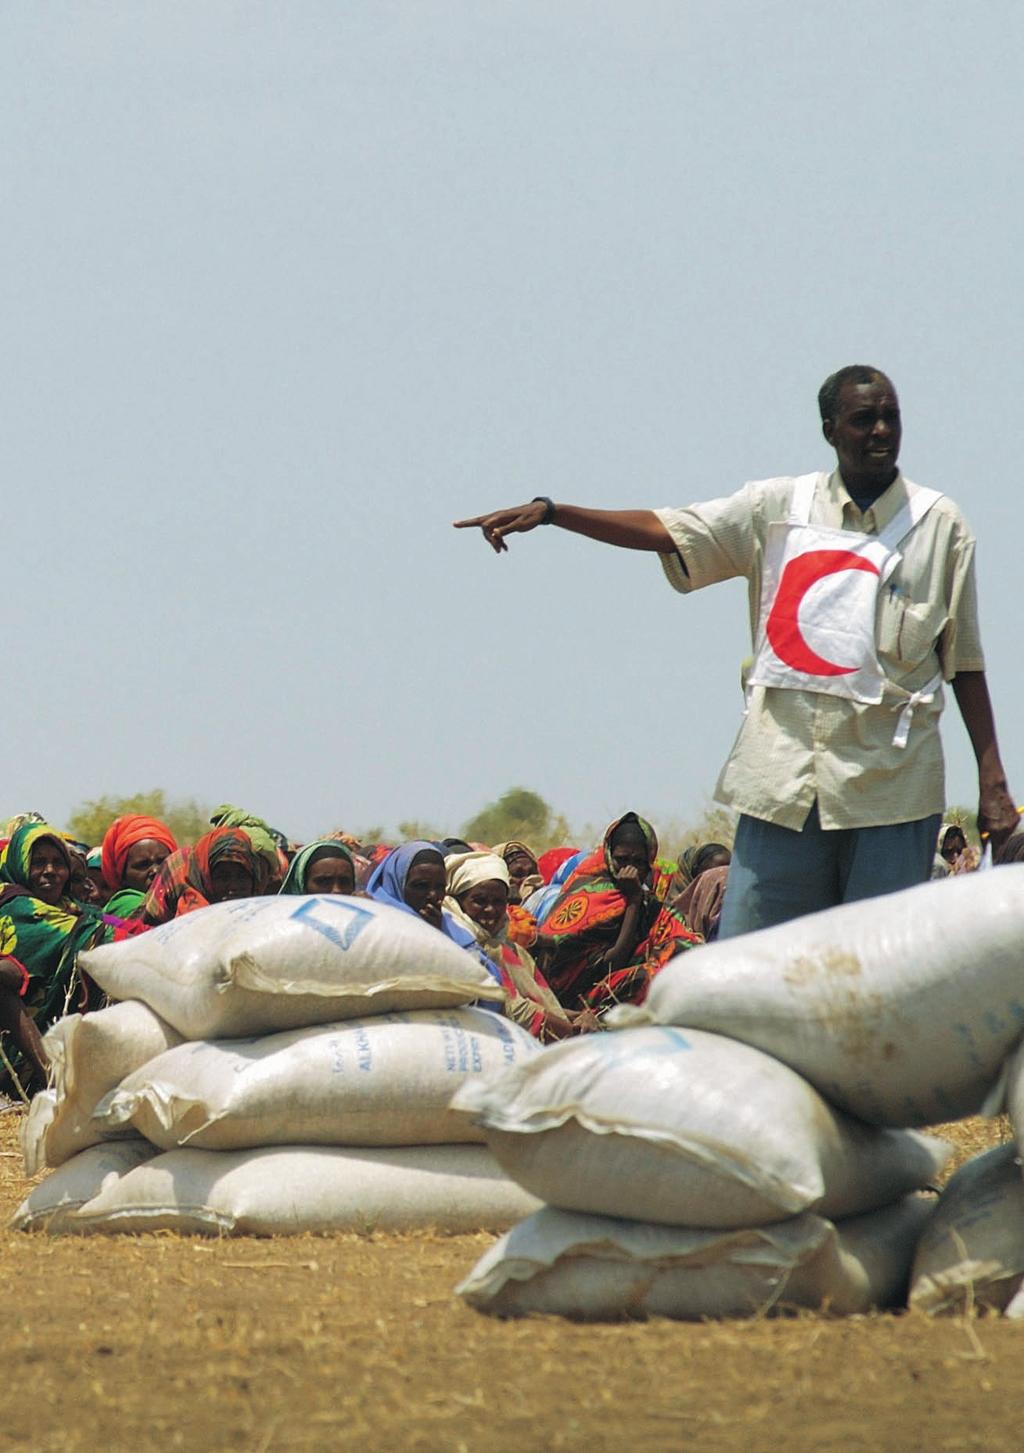 Somali Red Crescent Society Since 1991, the Somali Red Crescent Society and the ICRC have been working together to meet the needs of the victims of the longstanding conflict in Somalia and to build